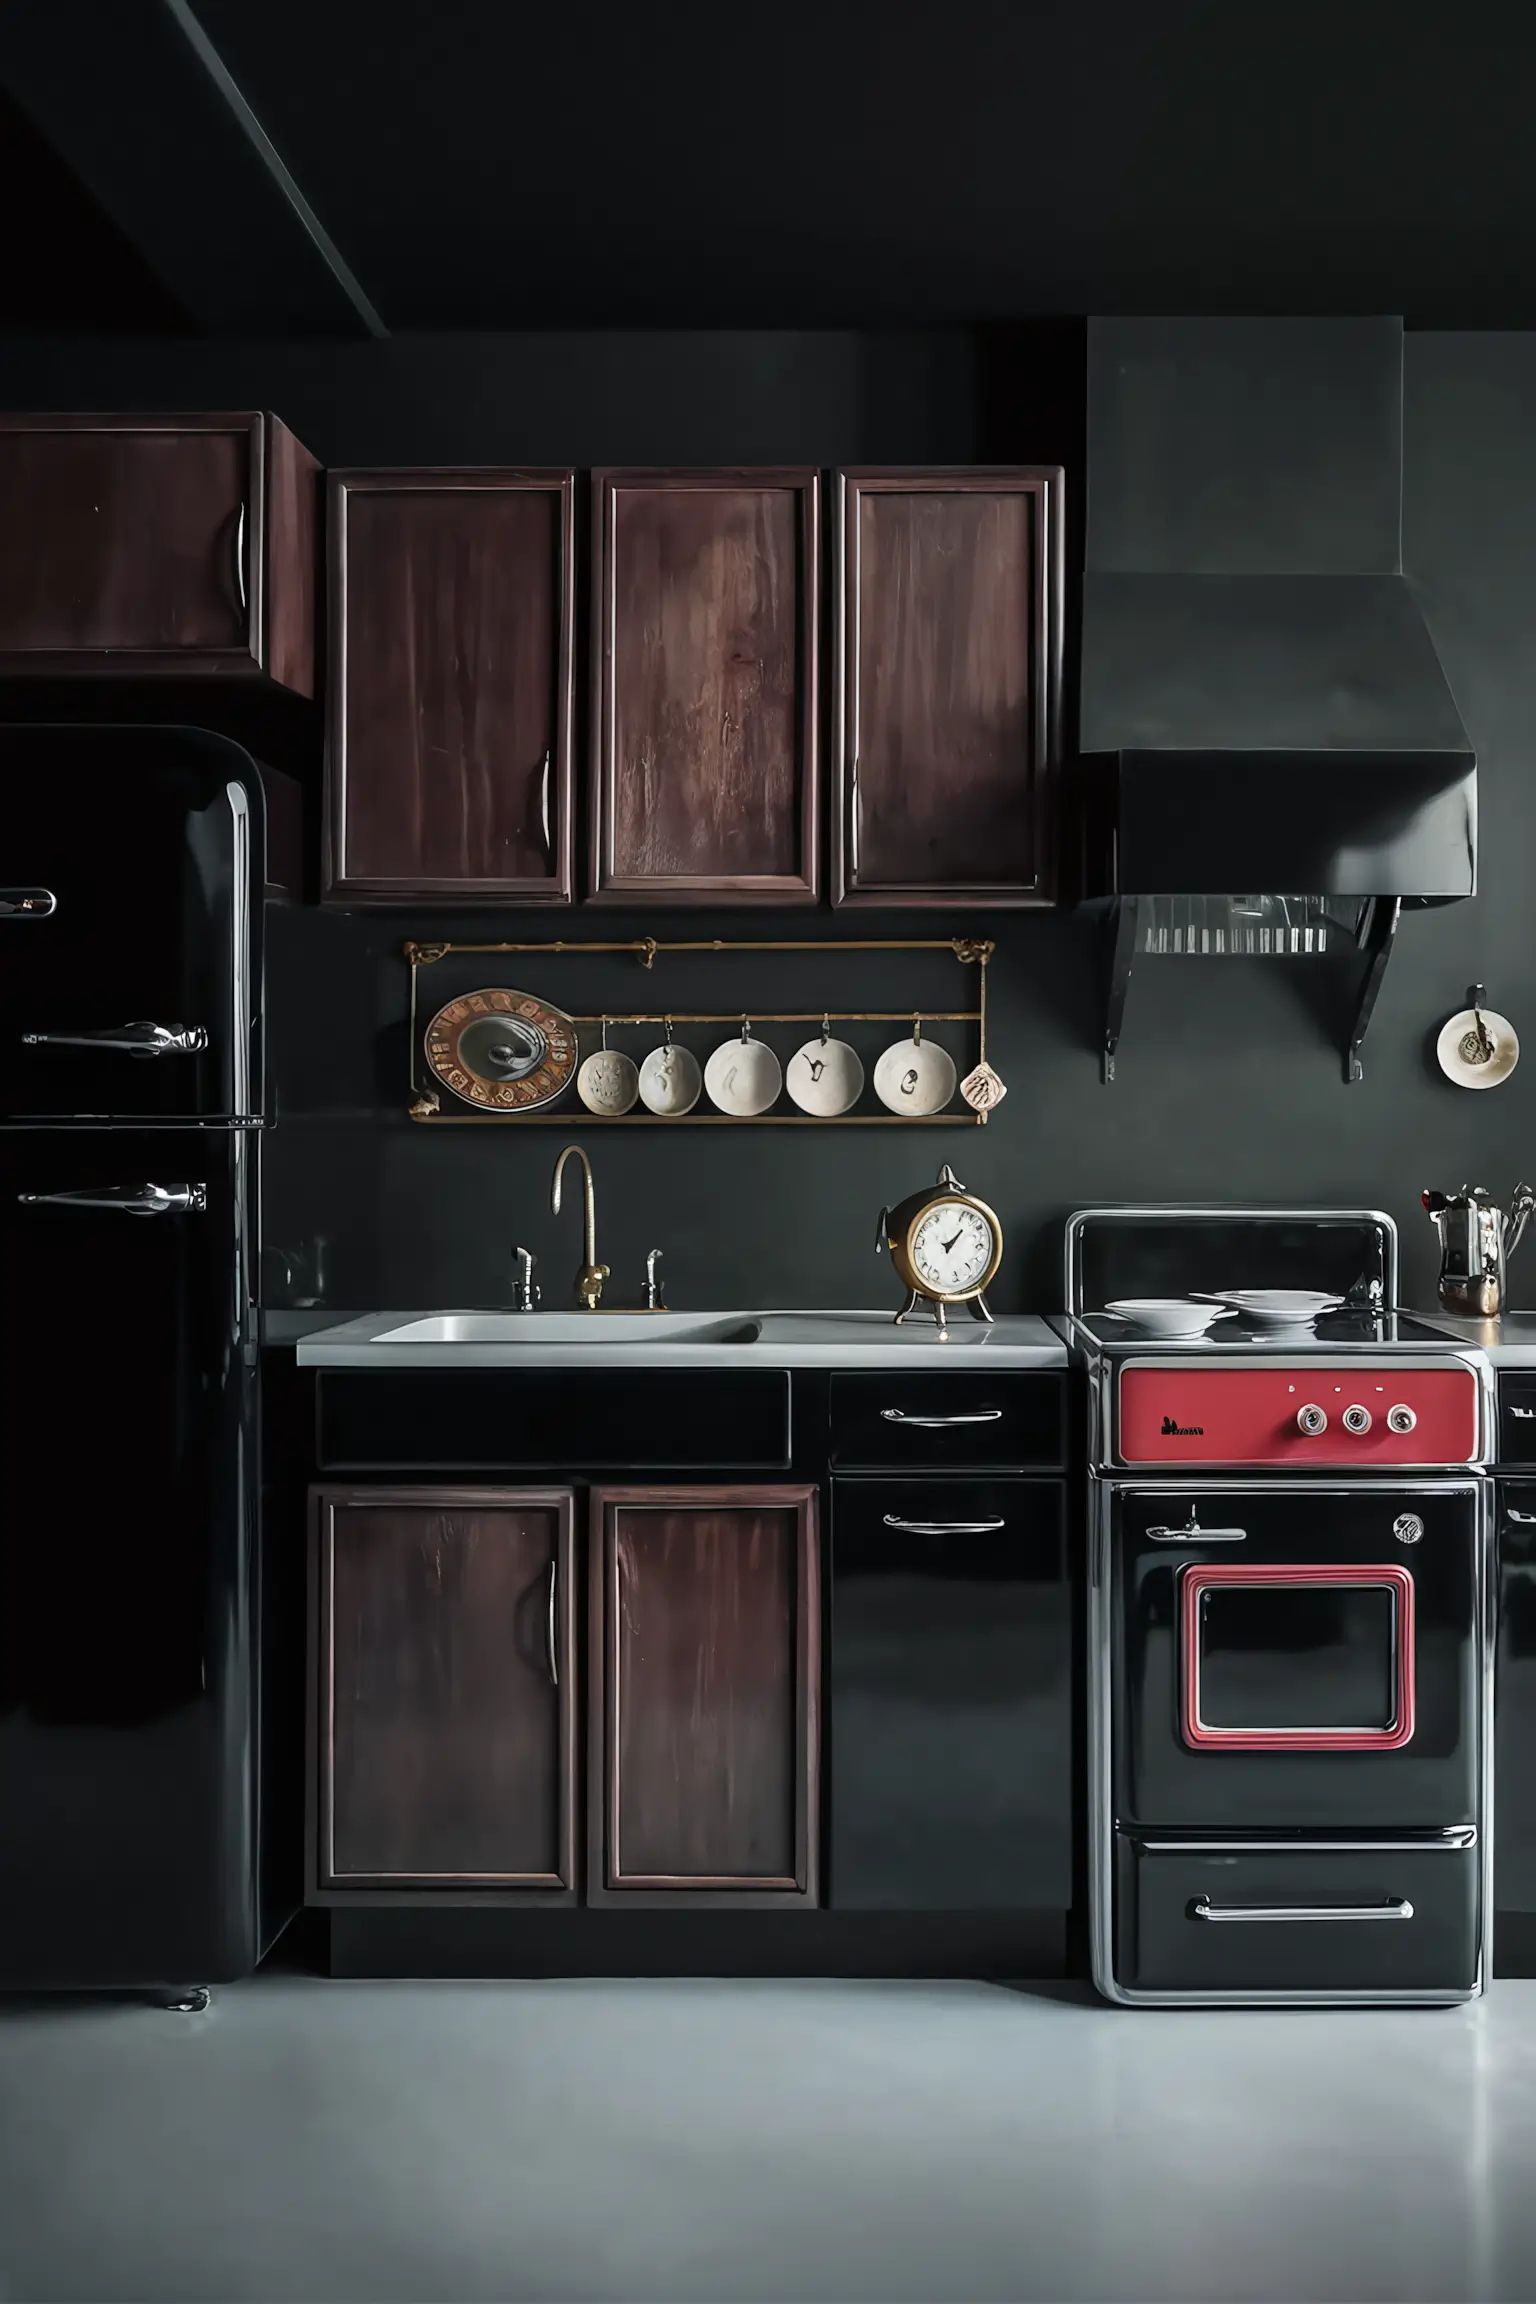 Vintage black kitchen with retro appliances and classic cabinetry.